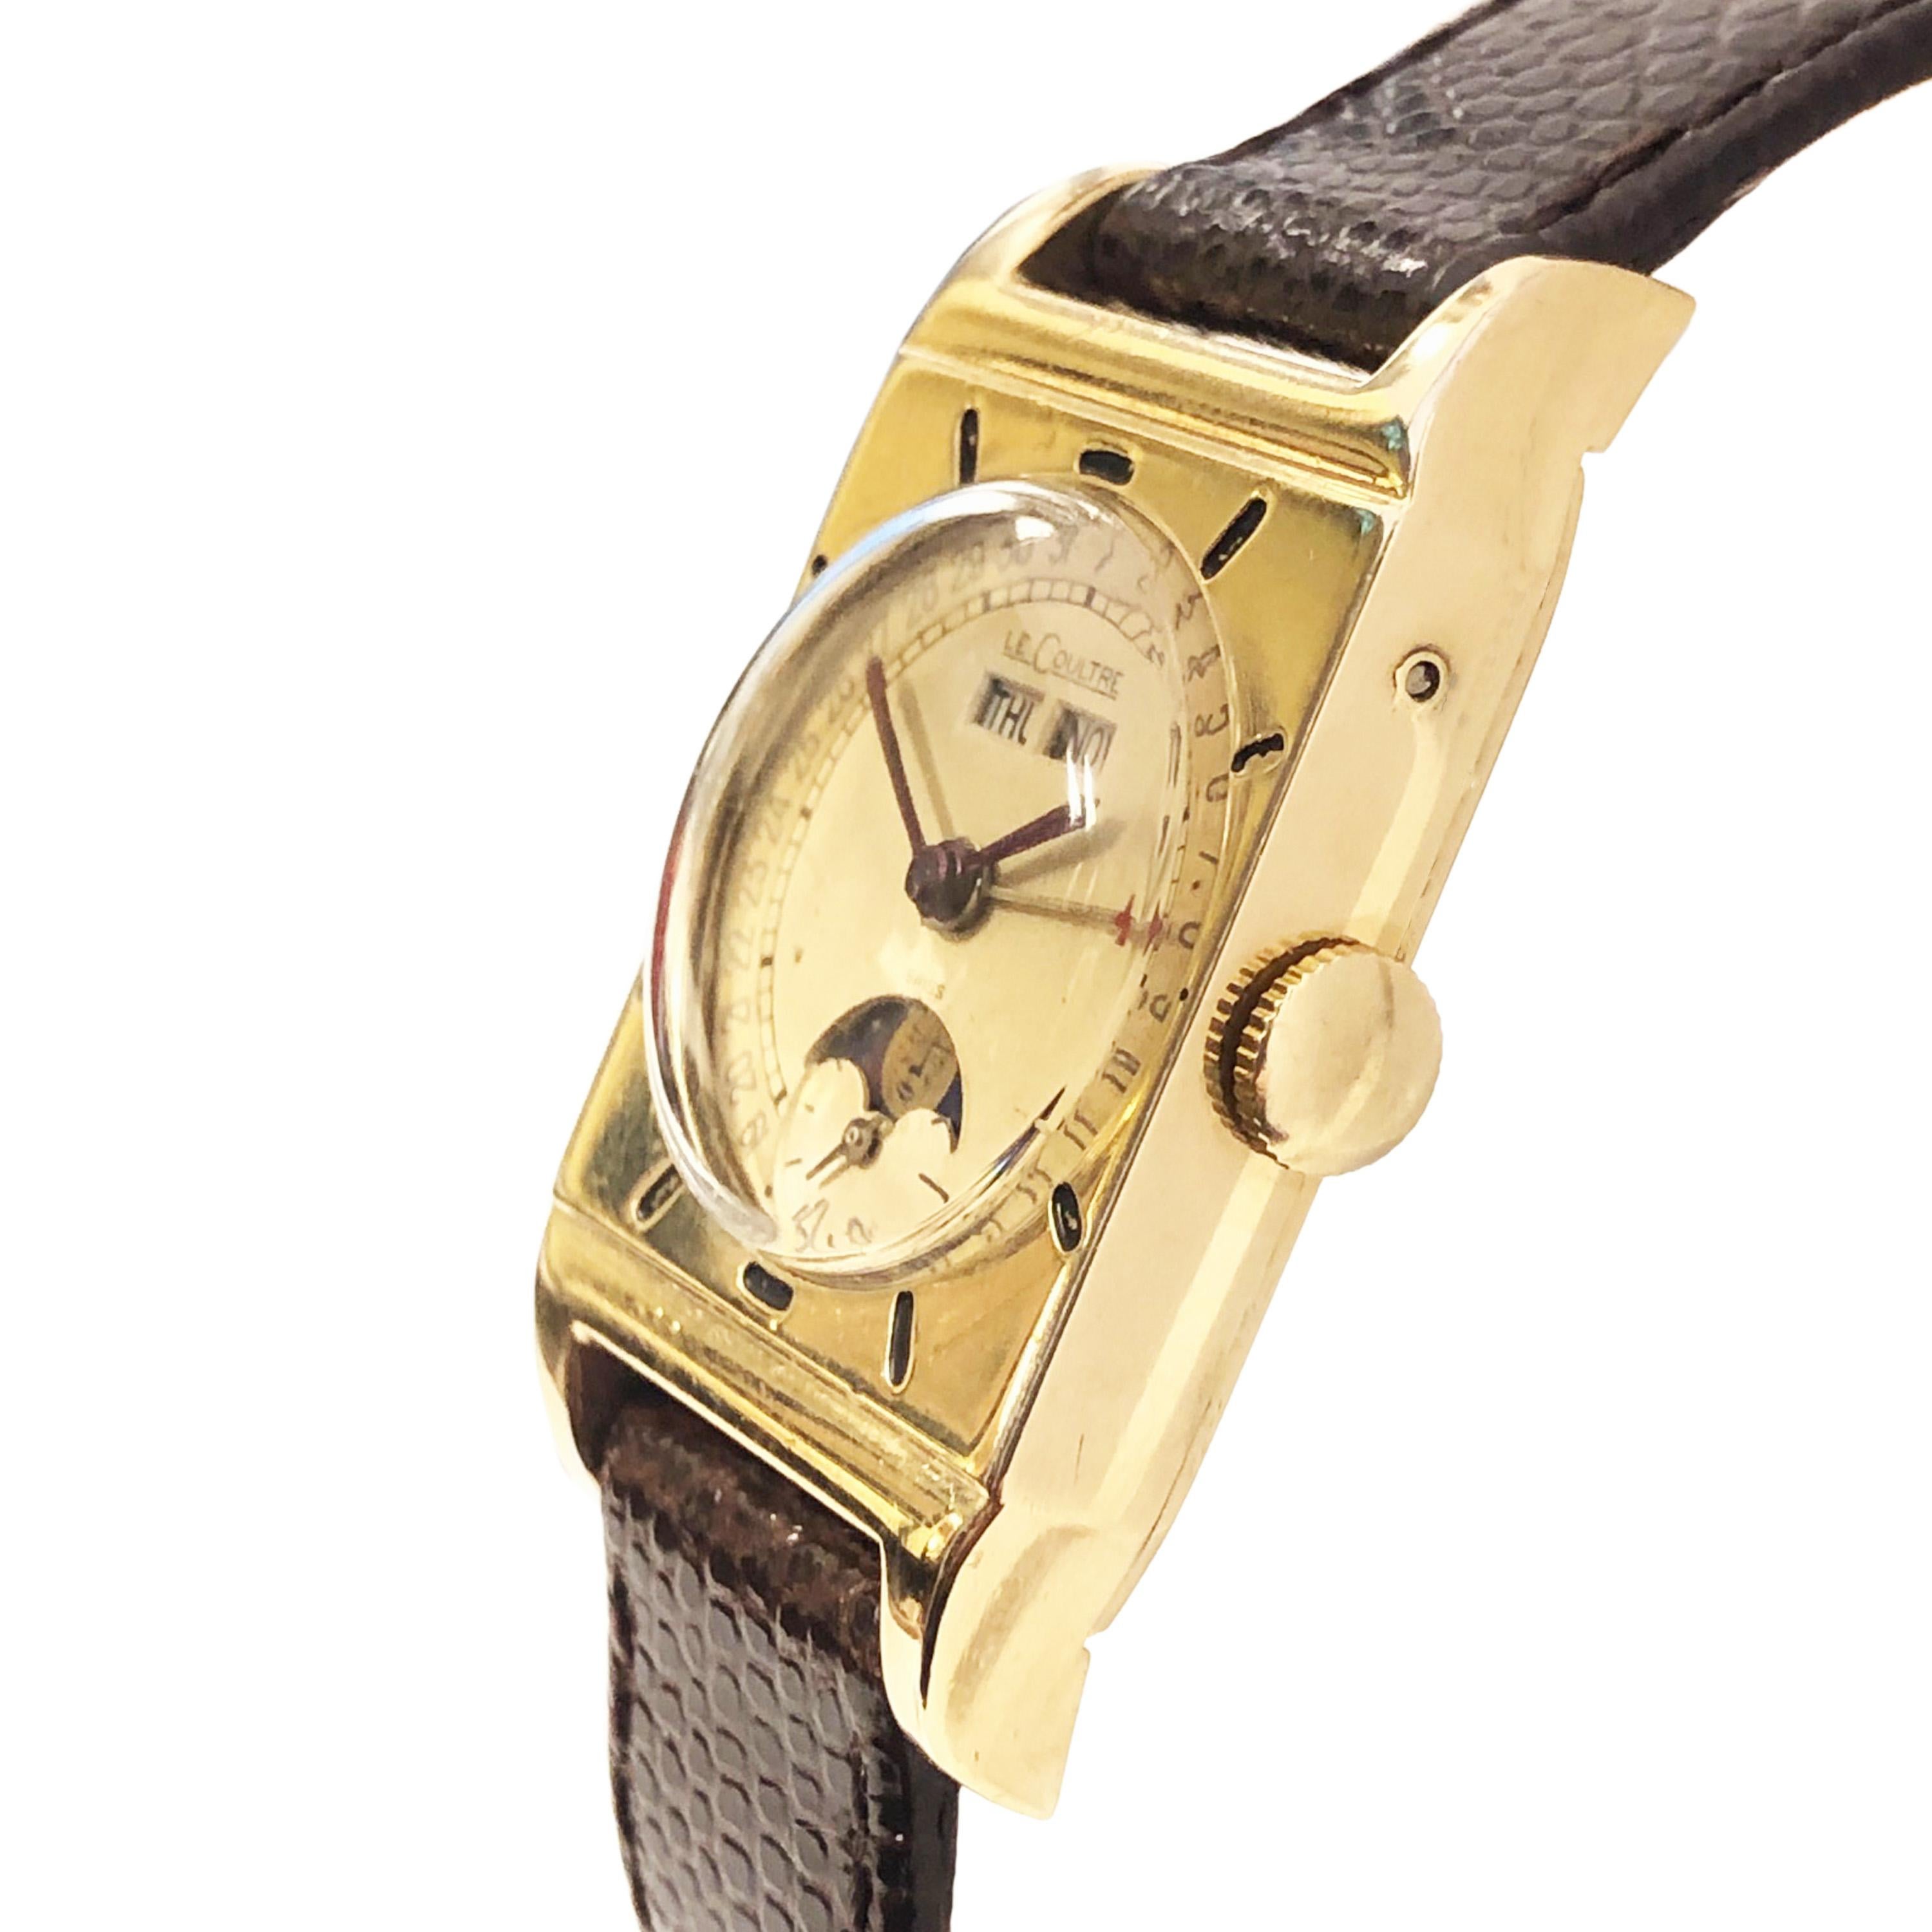 Circa 1940s LeCoultre Wrist Watch, 40 X 23 MM and 7 MM thick Gold Filled 2 Piece case. 17 Jewel Mechanical, Manual wind movement, Original 2 Tone White Cream Dial with outer track, Sub Seconds, Moonphase and Day Date Calendar. New Hirsch Brown